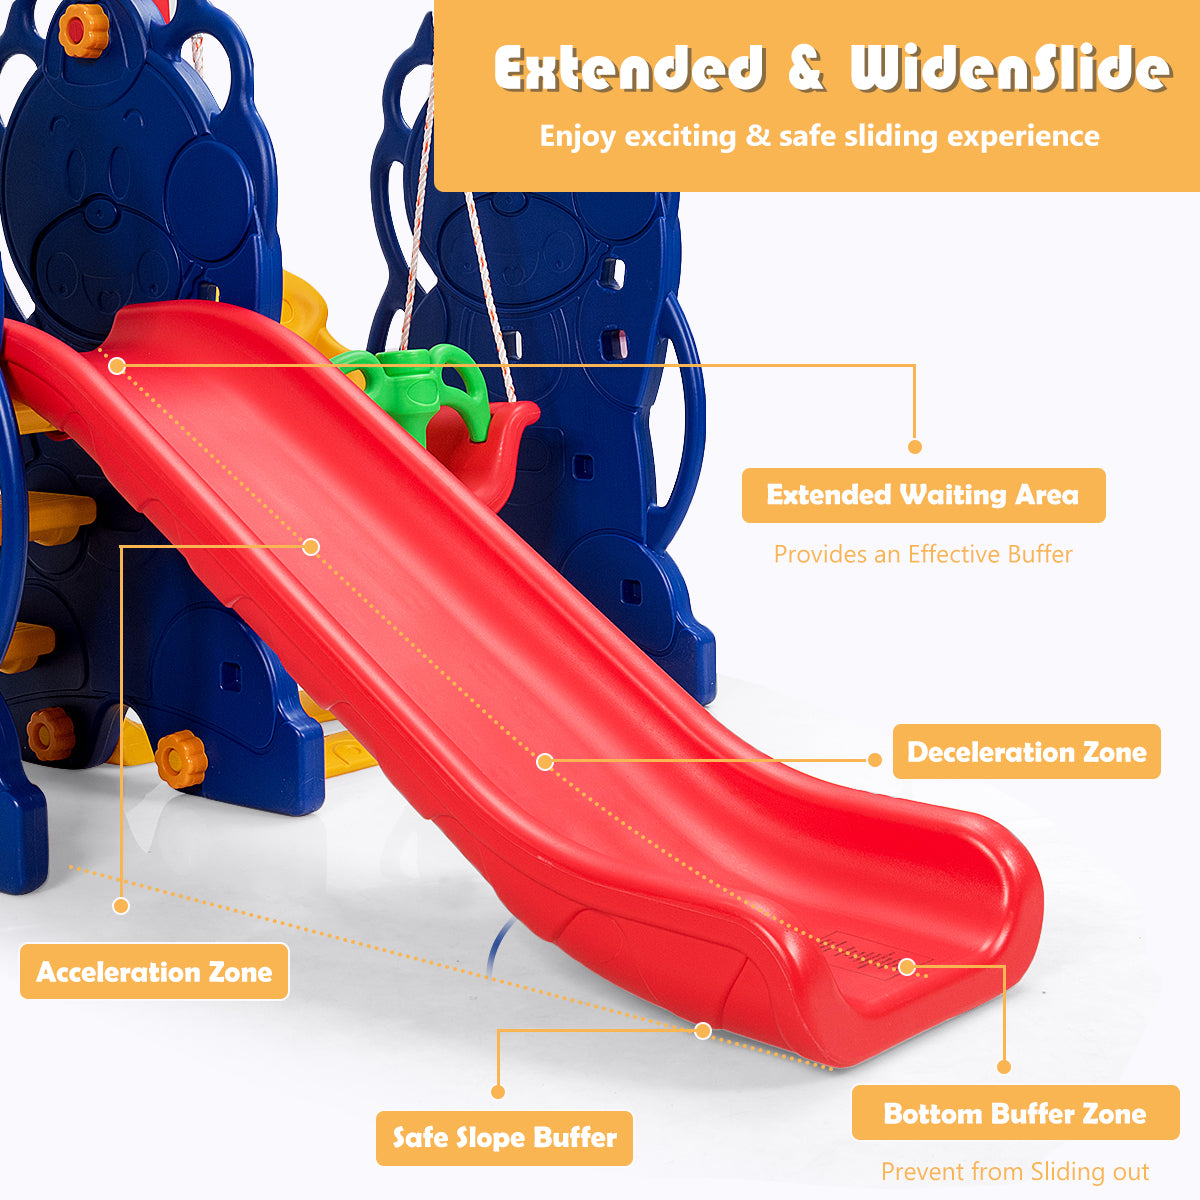 3-in-1 Toddler Climber and Swing Playset